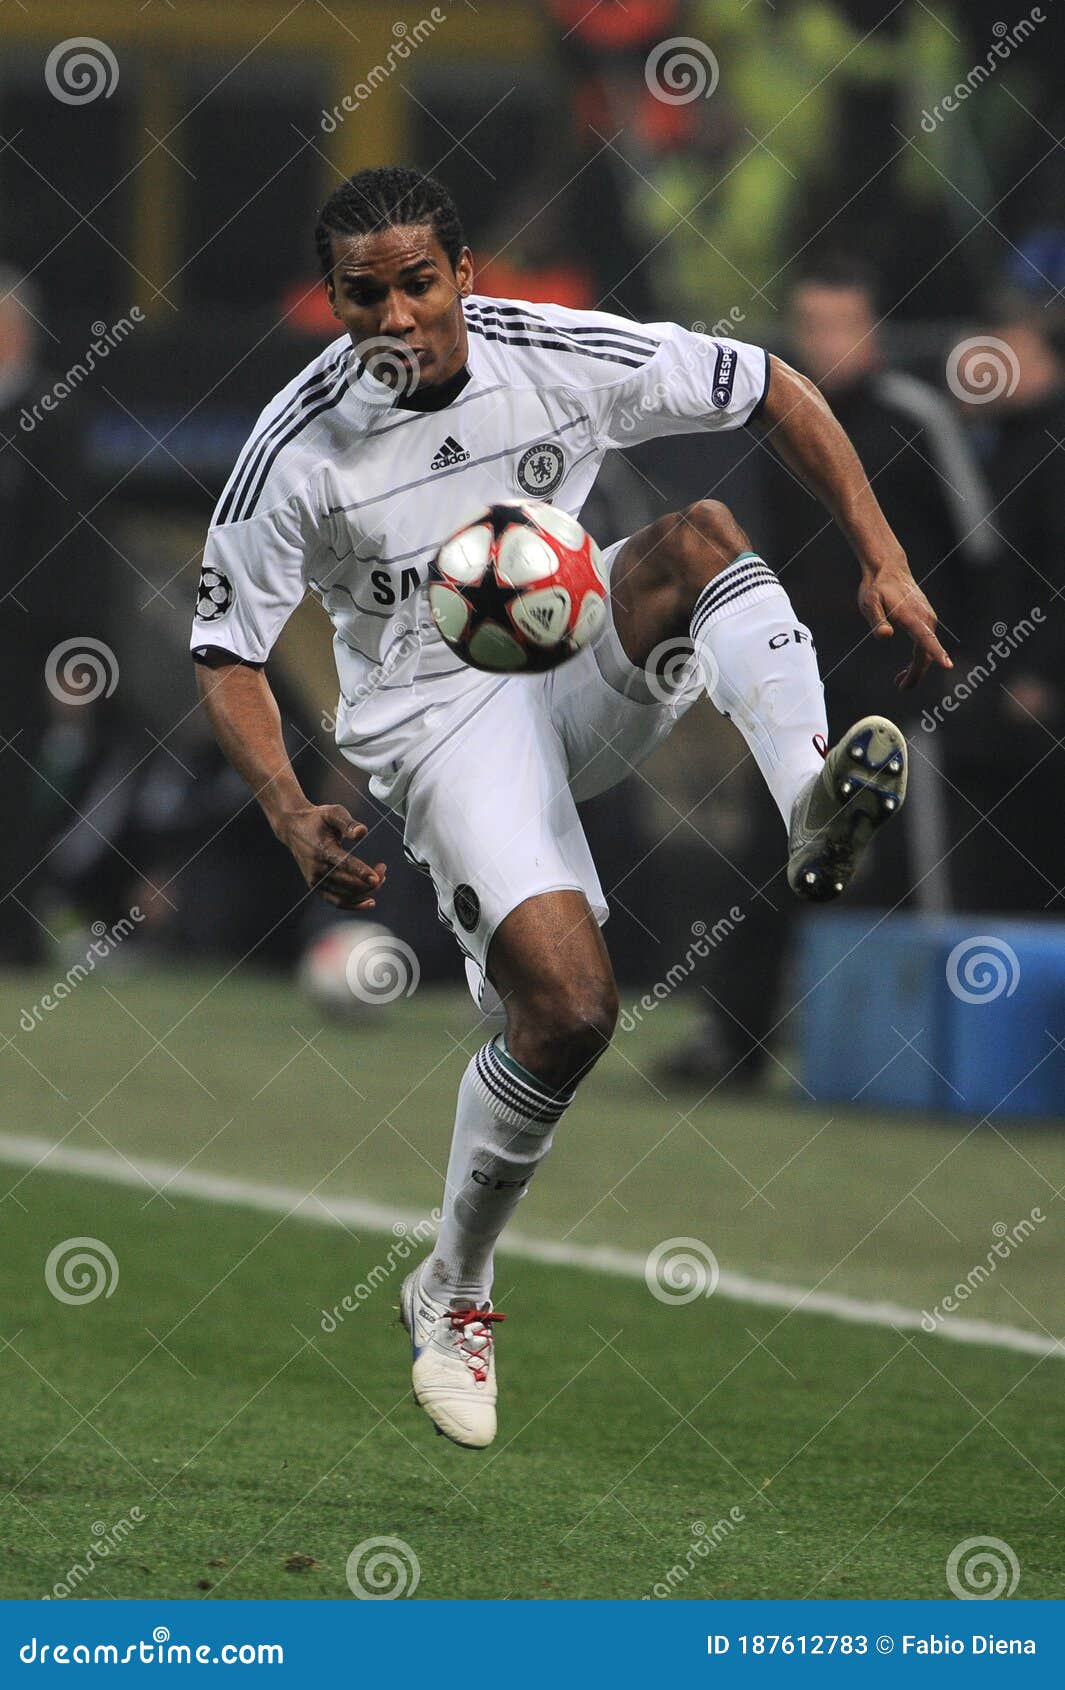 Didier Drogba in the Match Editorial Stock Photo - Image of champions, league: 187612783